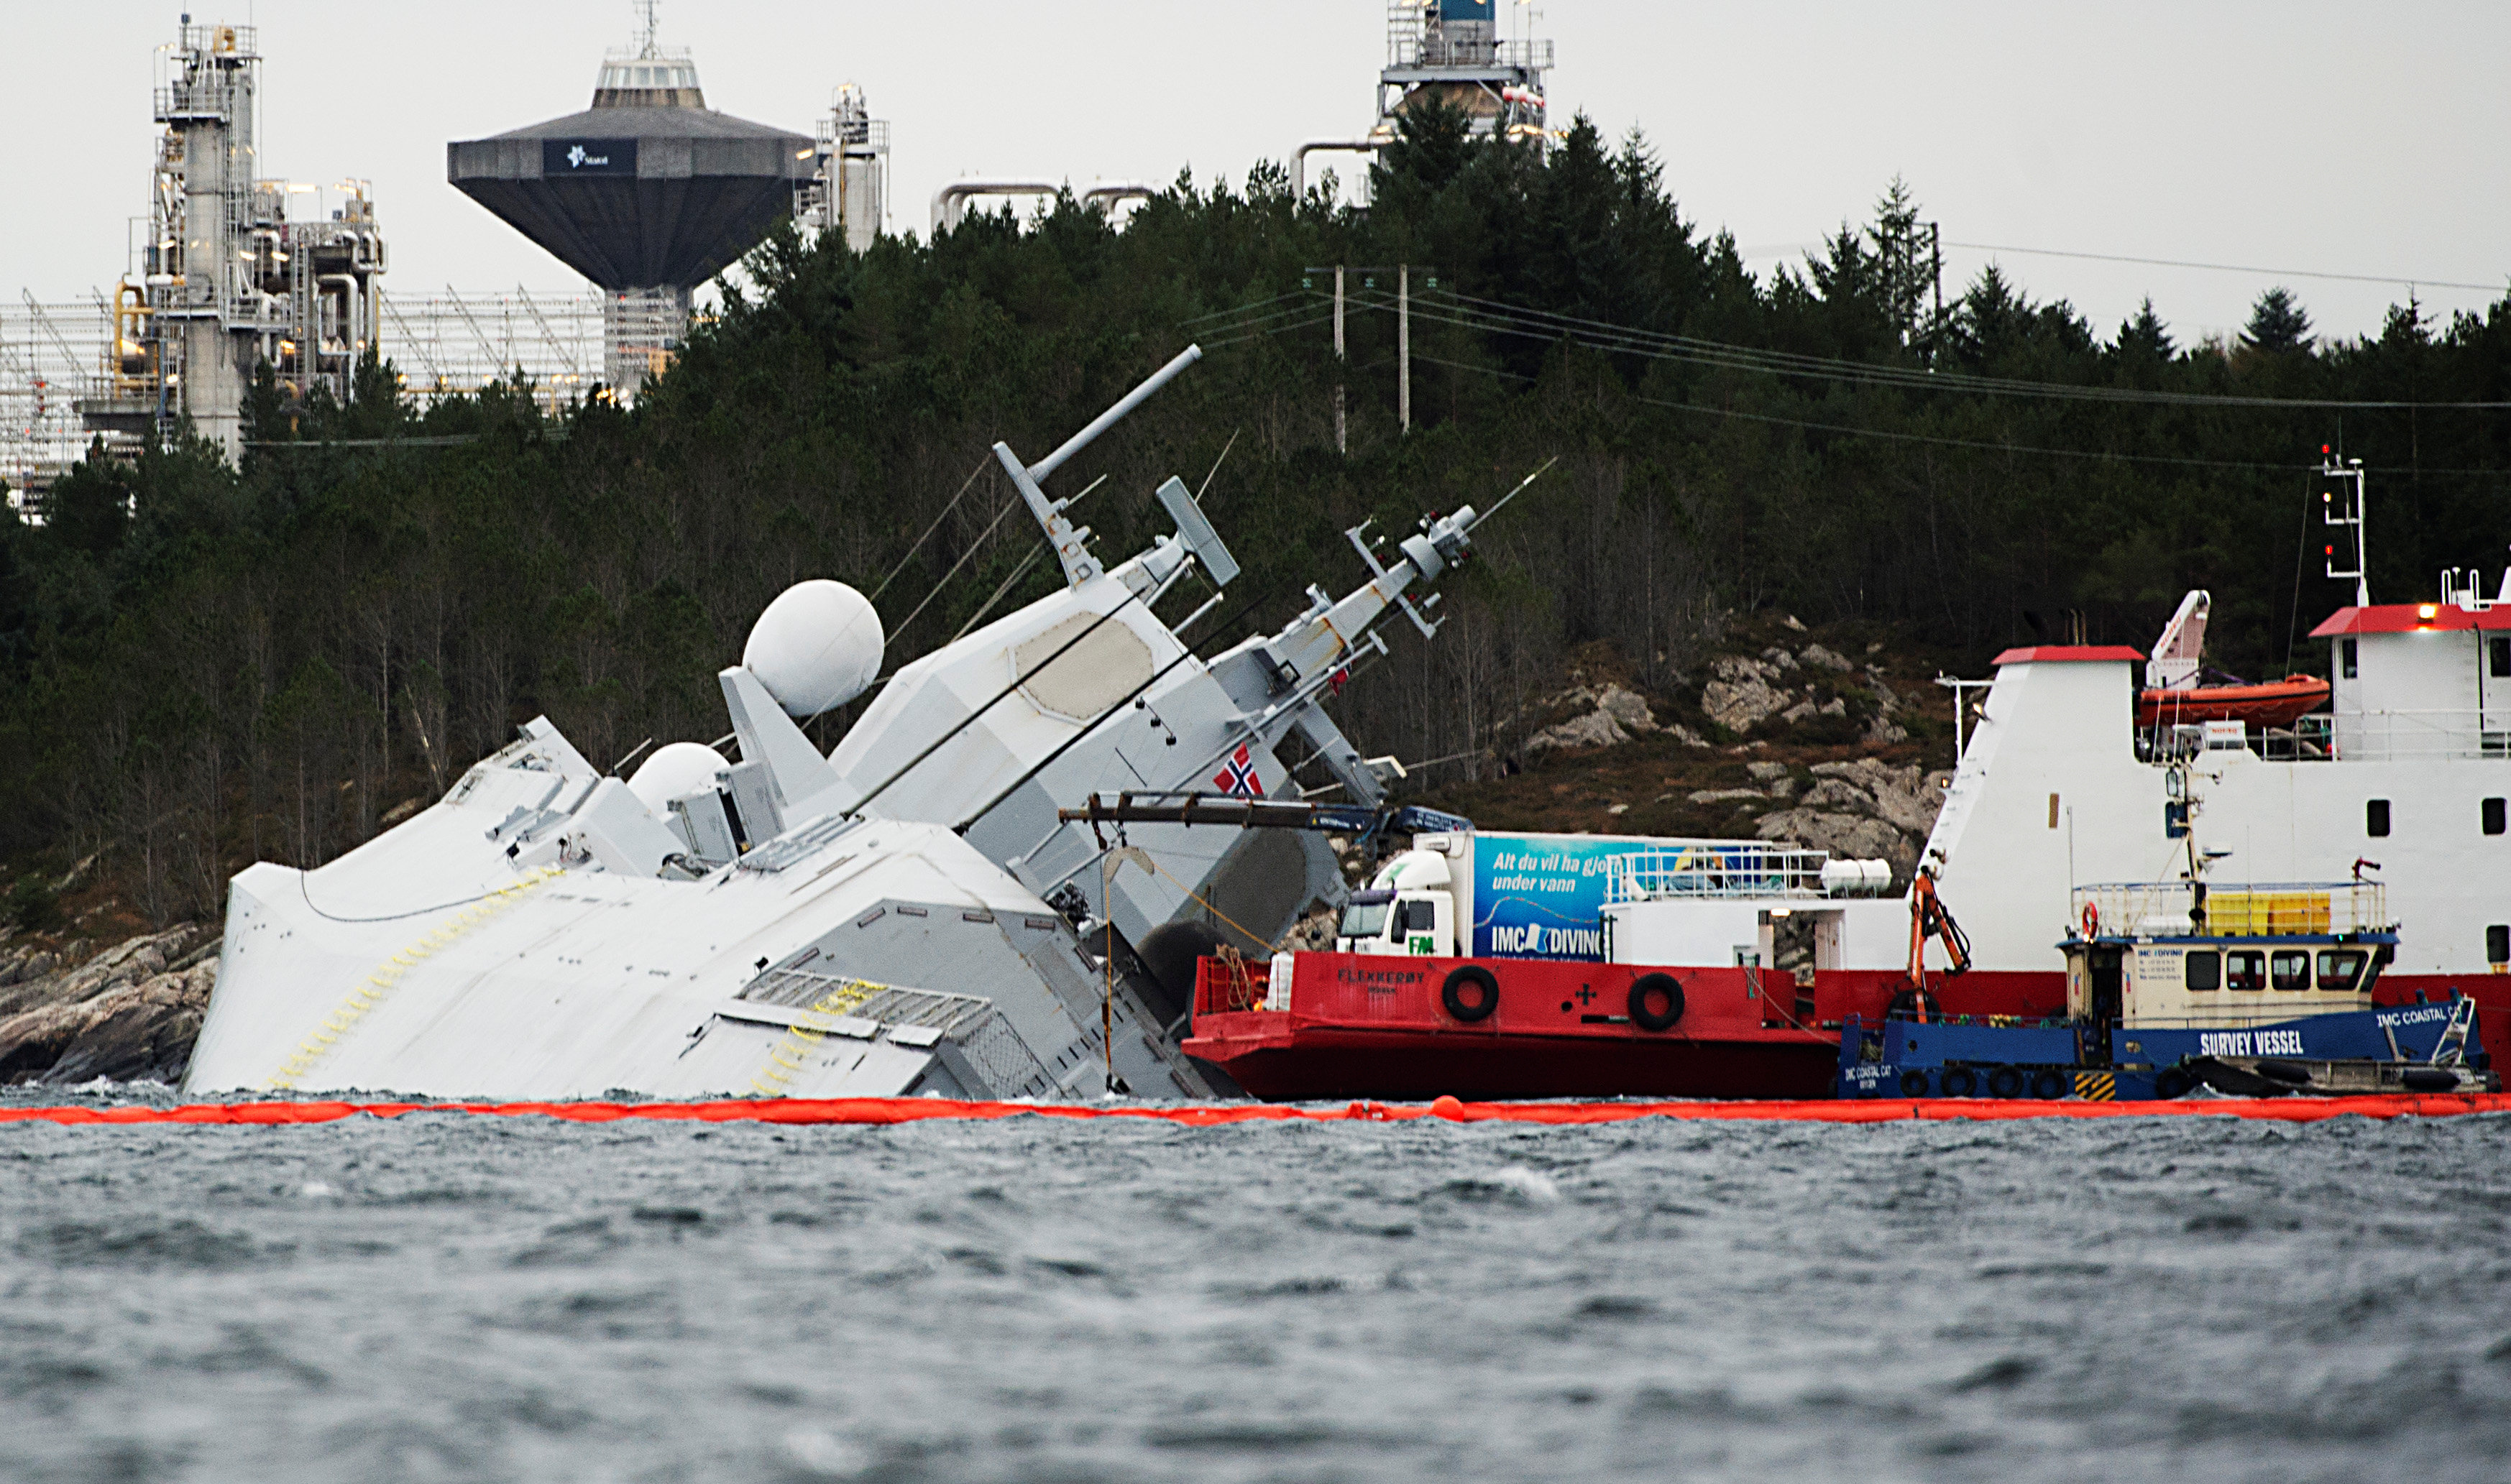 The Norwegian frigate "KNM Helge Ingstad" takes on water after a collision with the tanker "Sola TS" in Oygarden